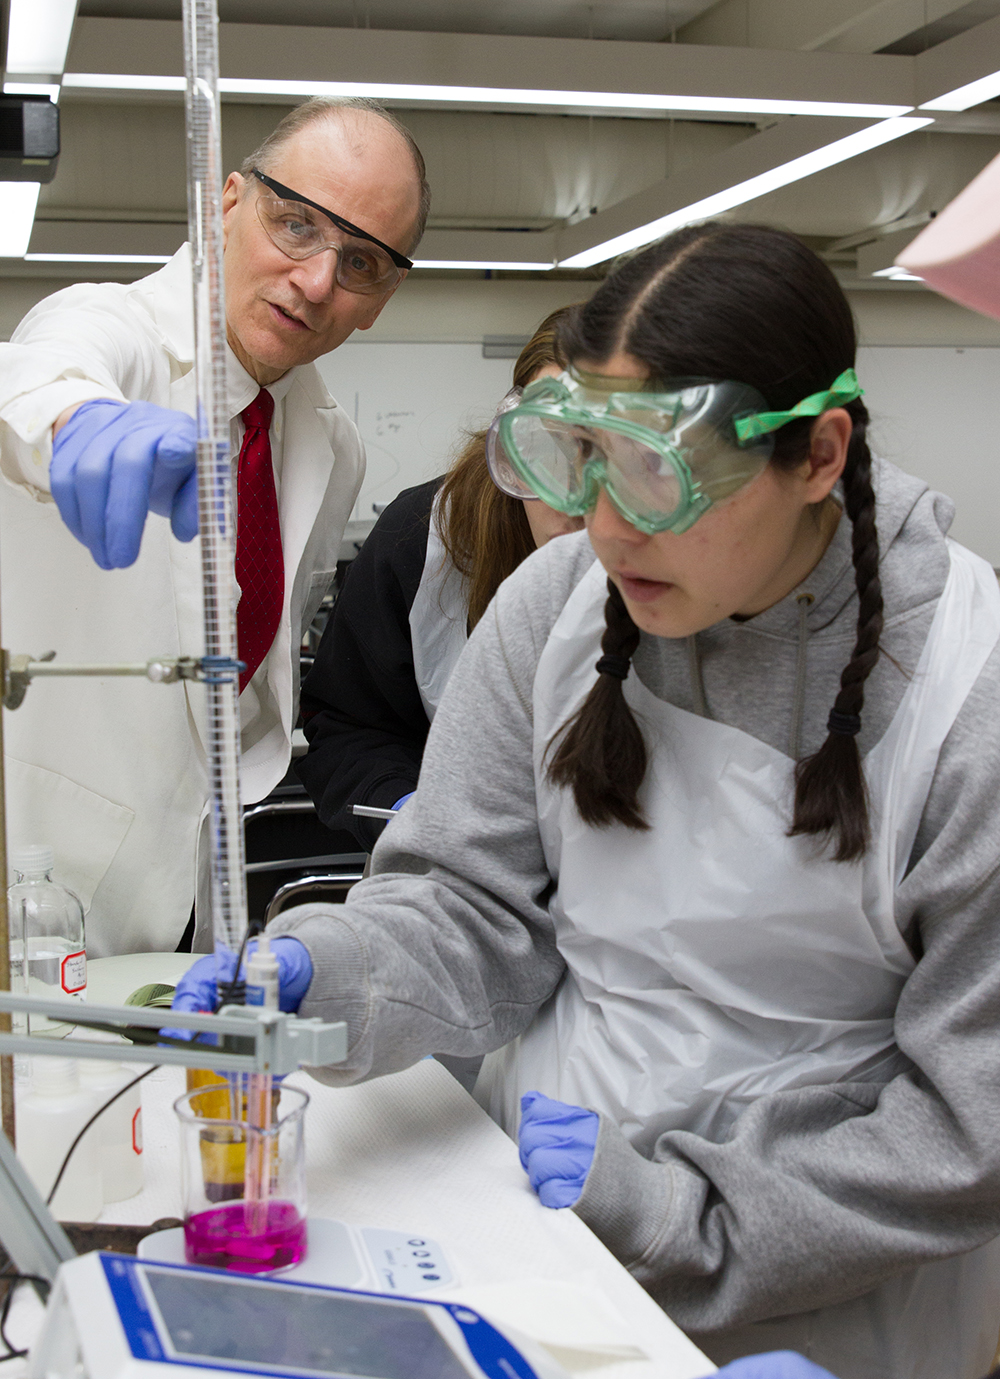 Professor Dave Dzombak instructs students conducting a lab experiment in Environmental Engineering Lab